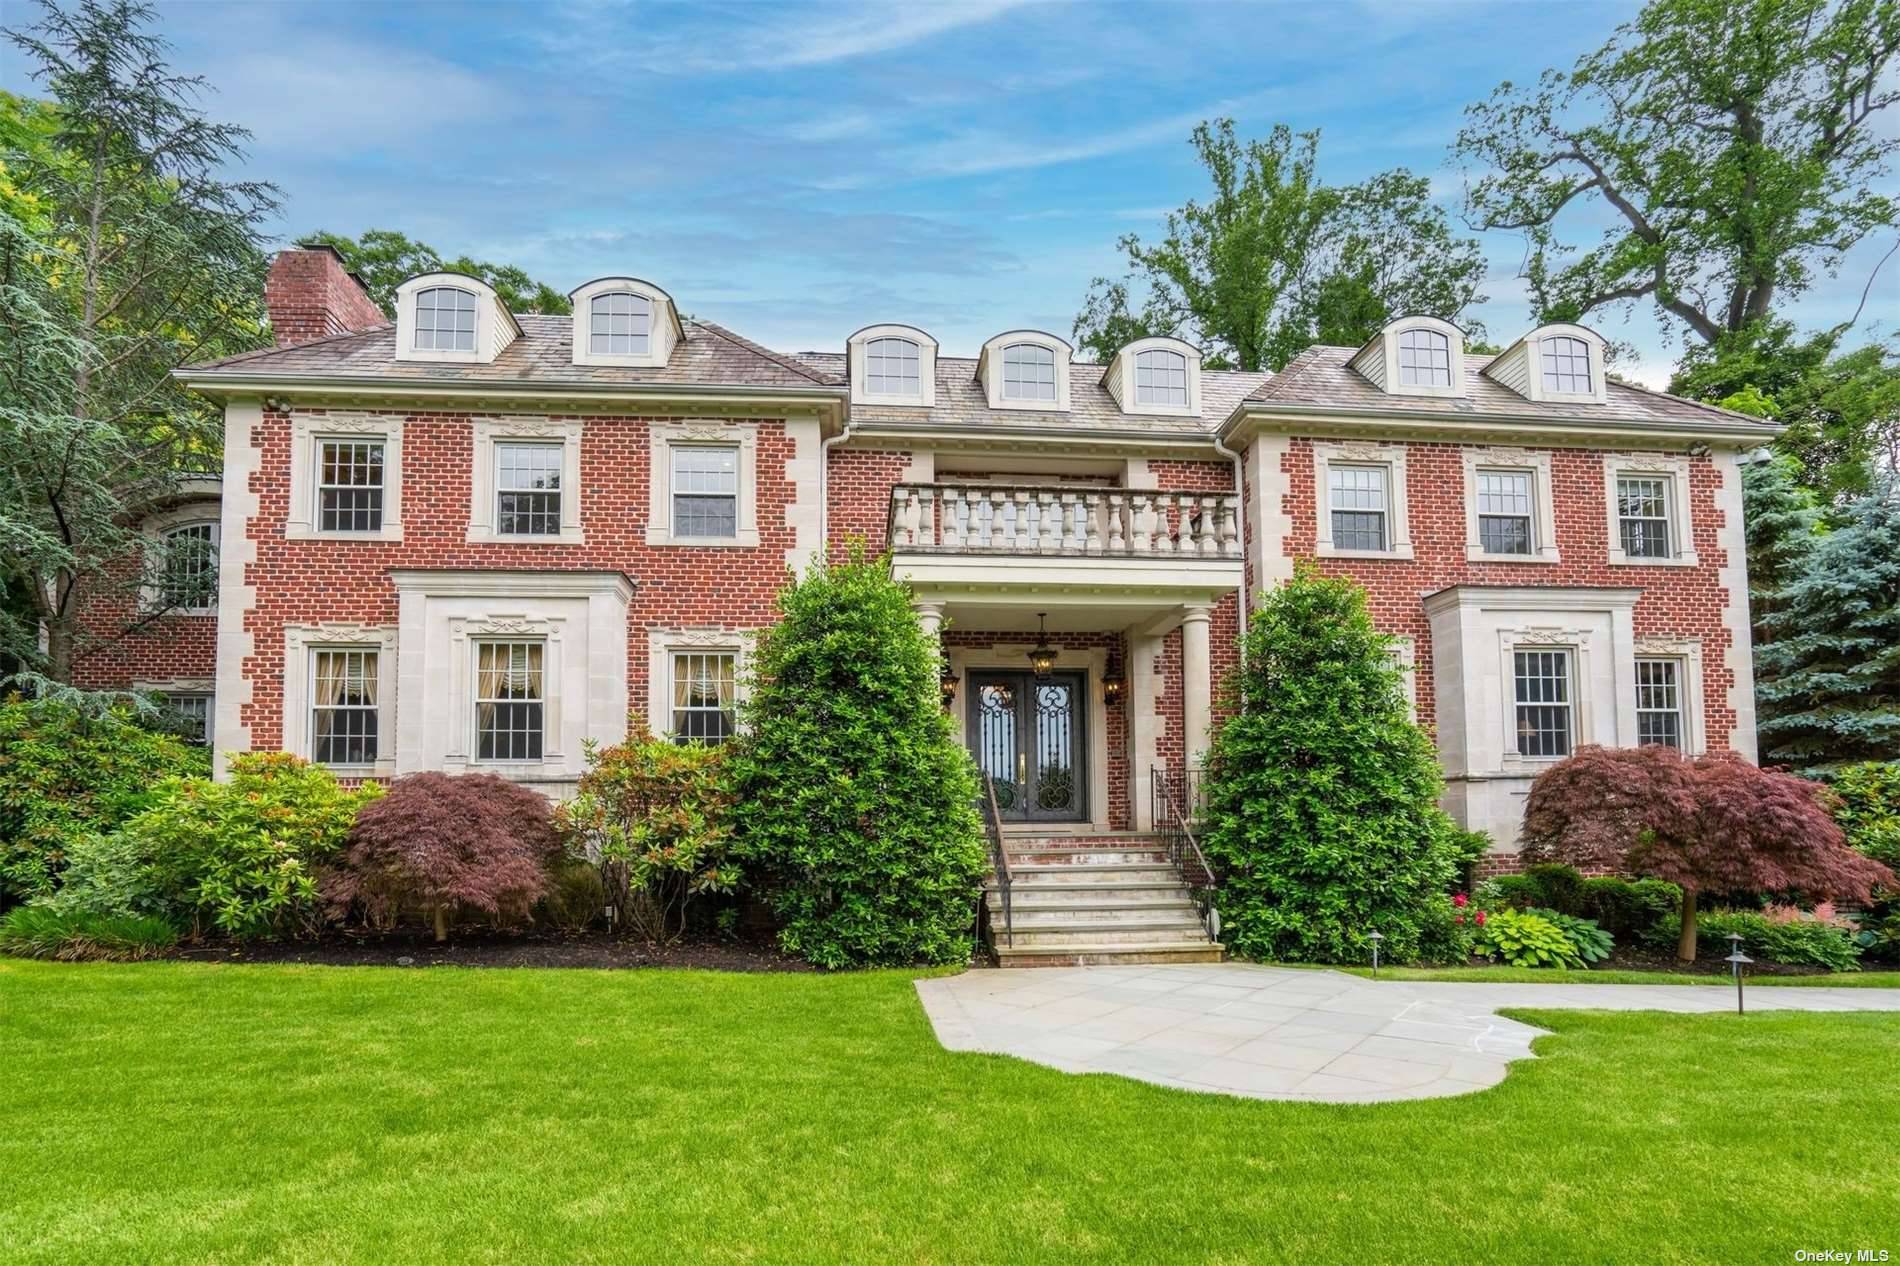 Welcome to 88 Walter Ln, Manhasset, NY 11030, a grand colonial masterpiece that embodies exquisite craftsmanship and superior design.